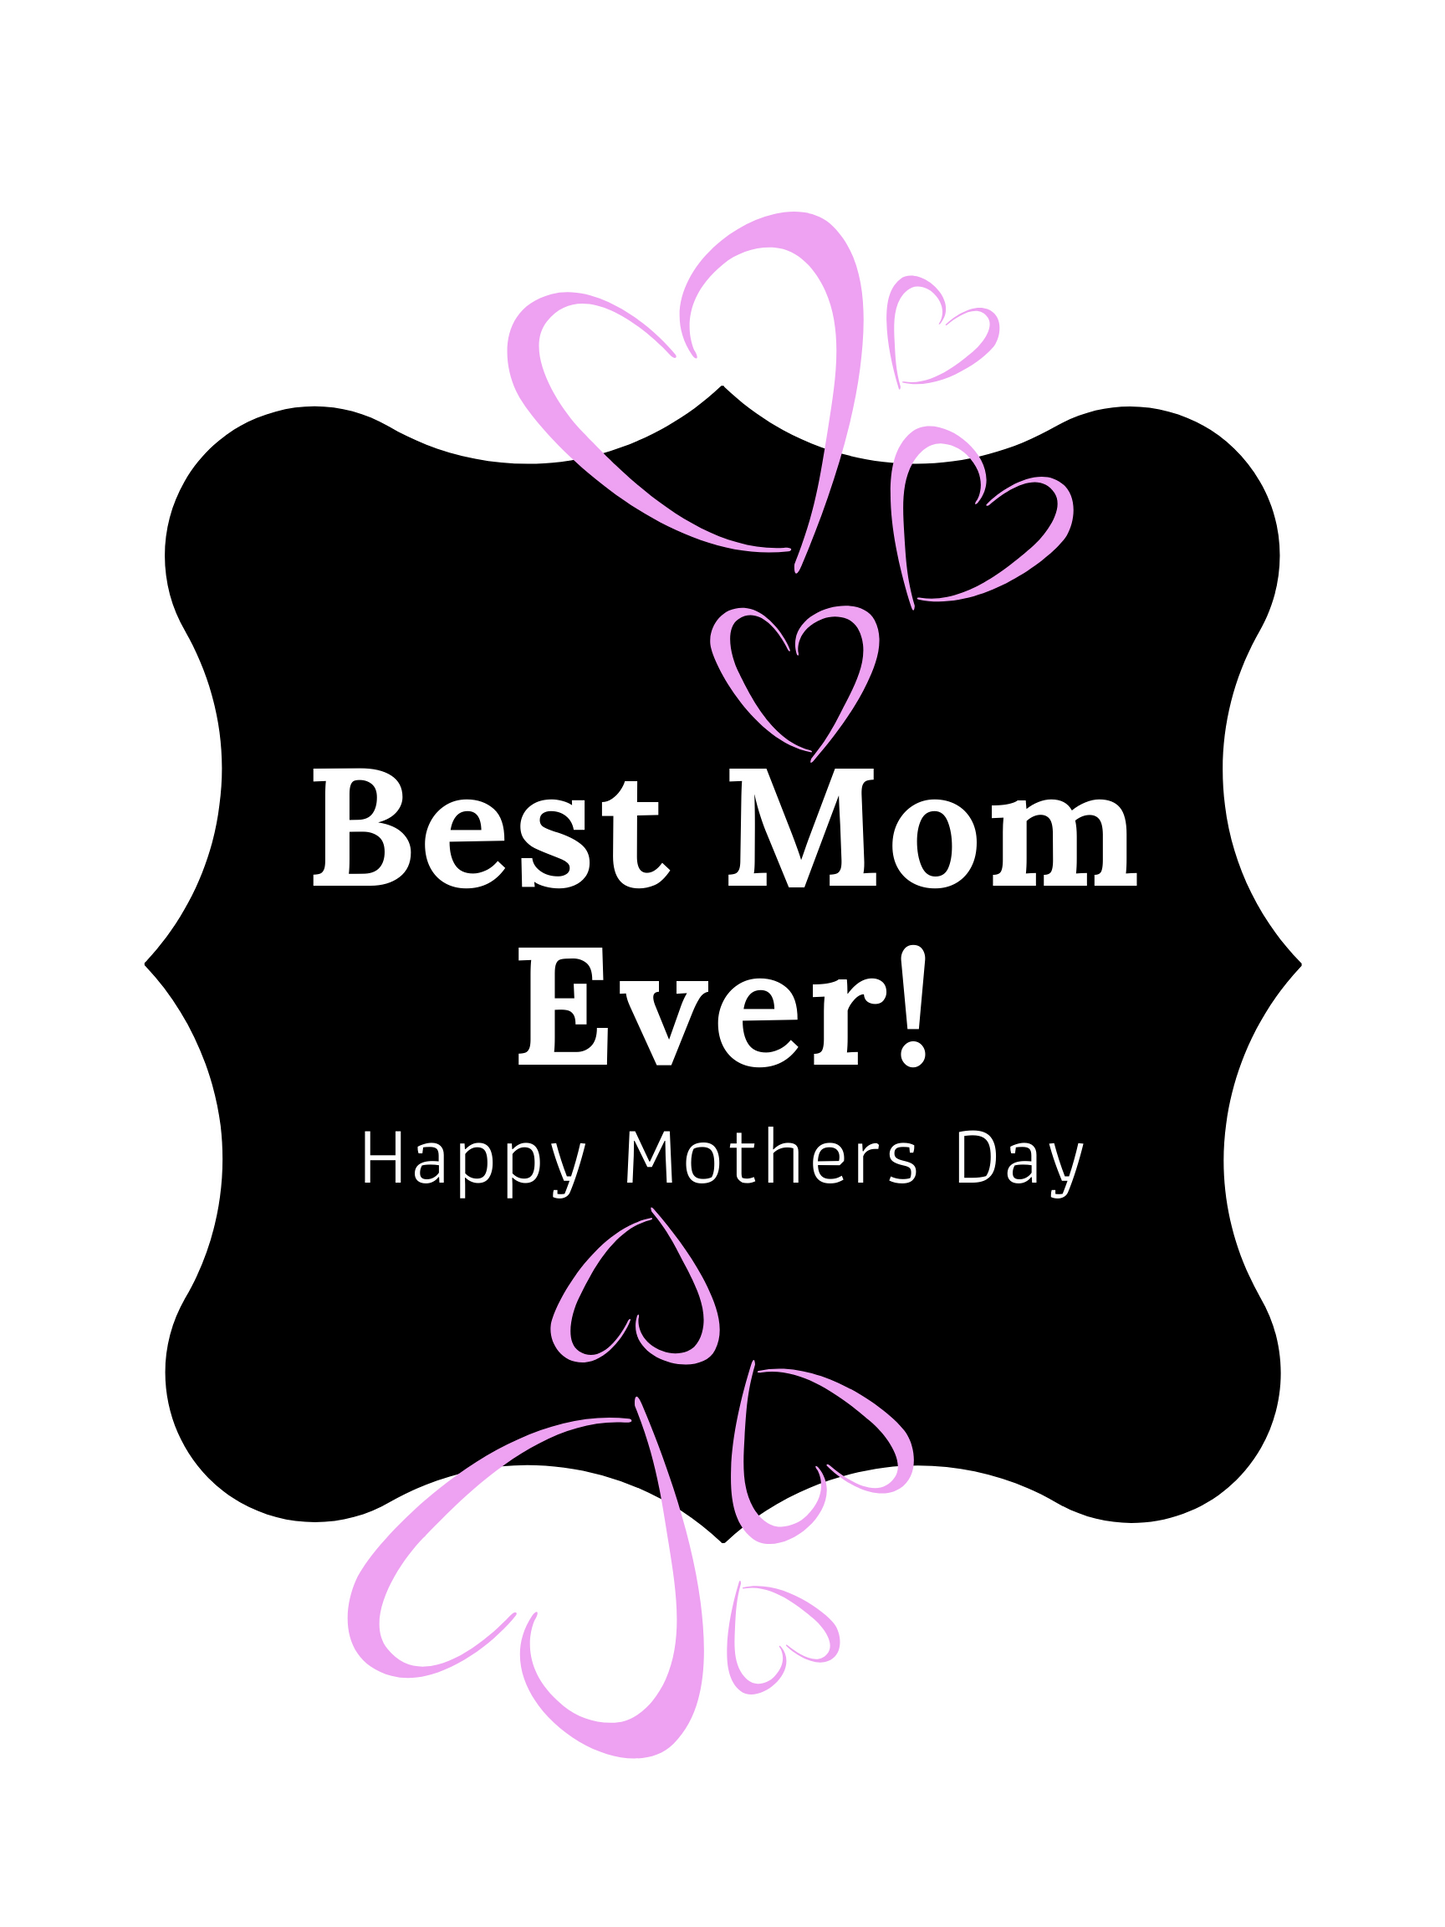 Free Printable Mothers Day Poster- Best Mom Ever Digital Poster. Free Digital Download Poster to Celebrate Moms